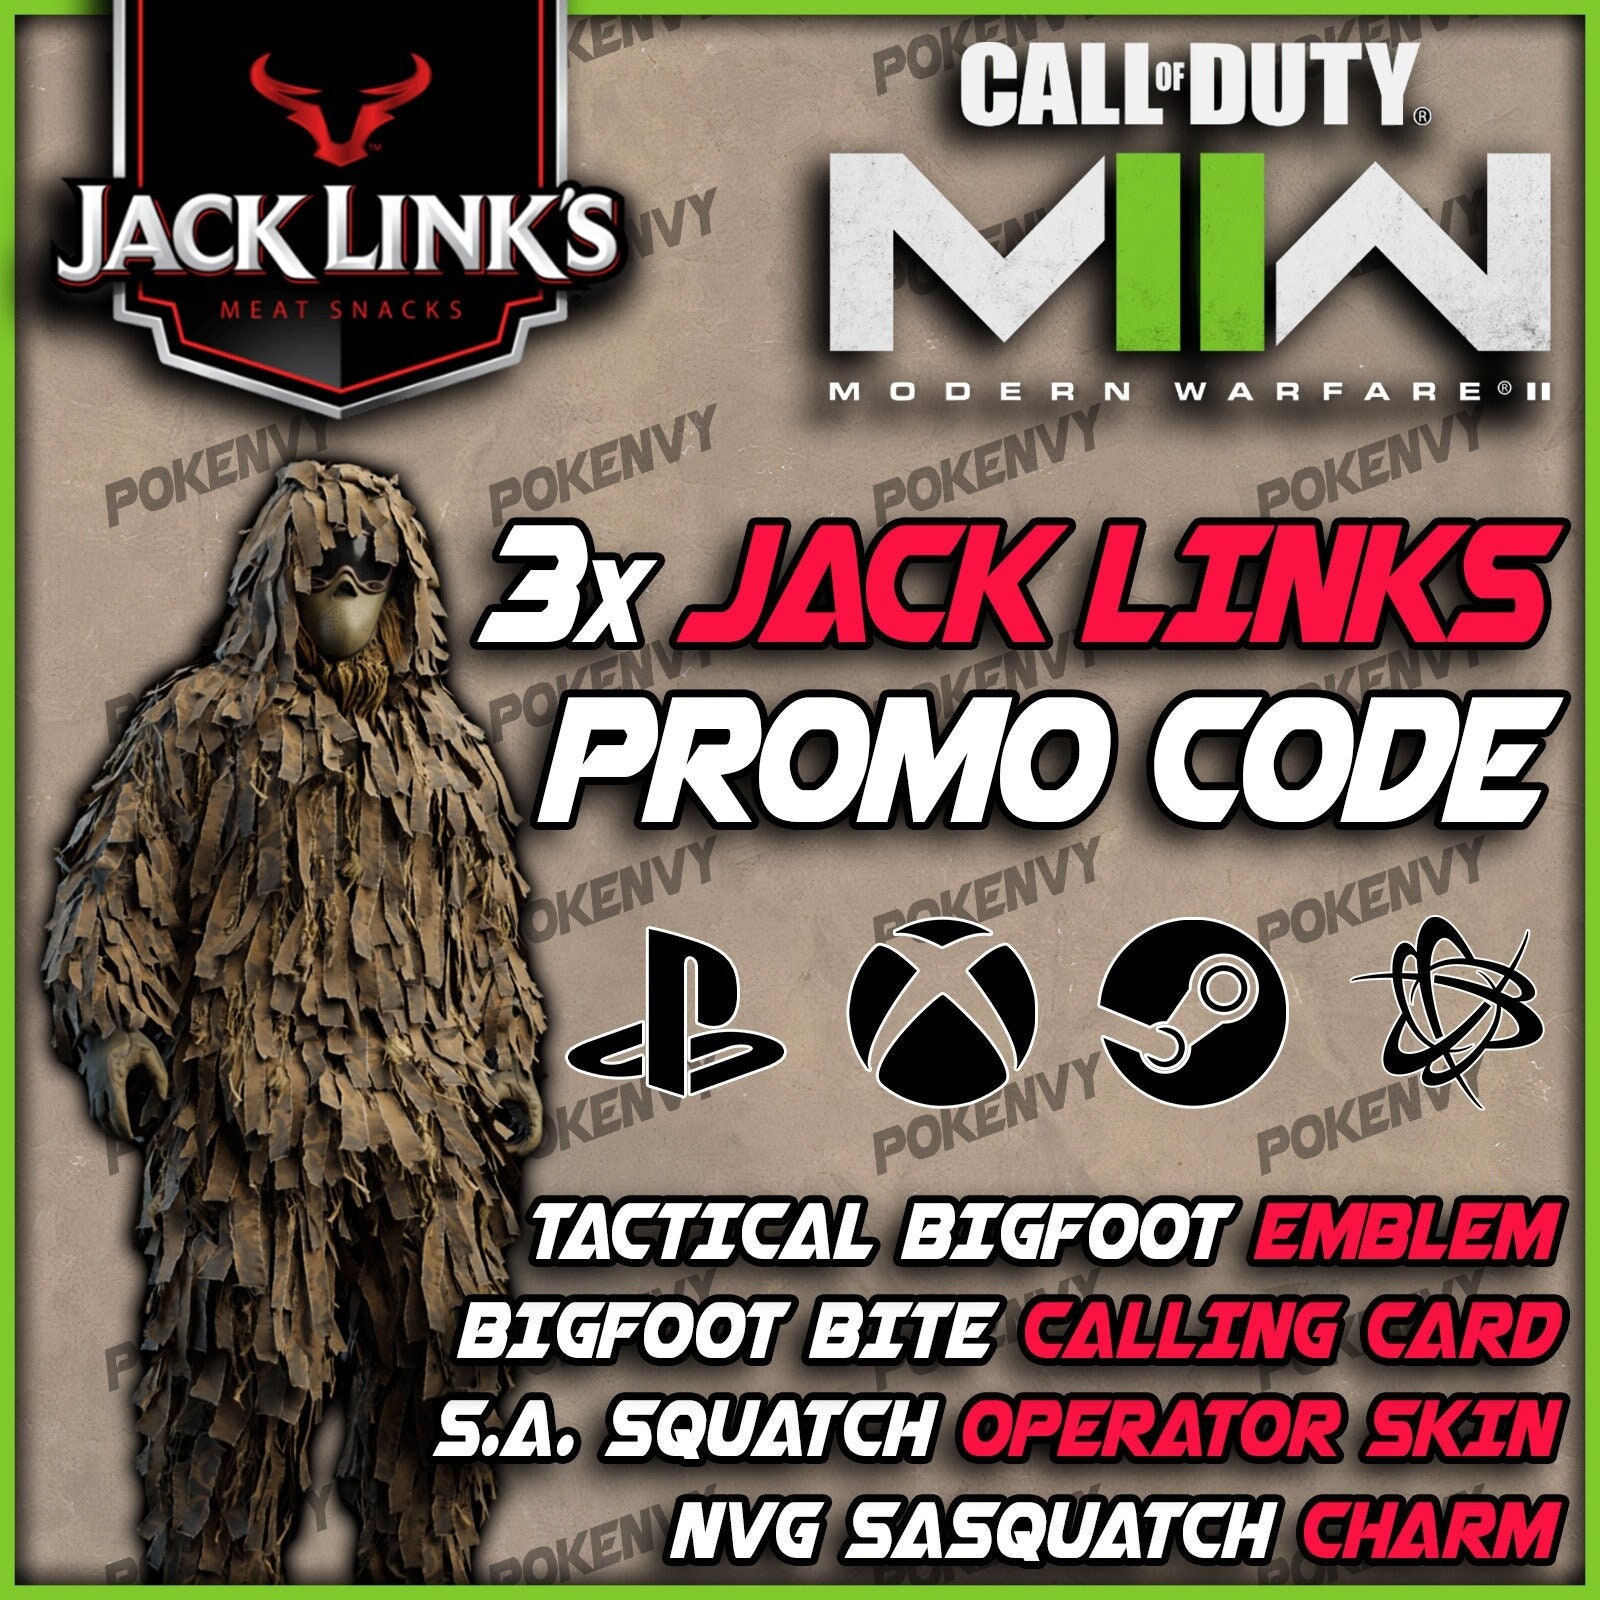 Call of Duty - Jack Link's